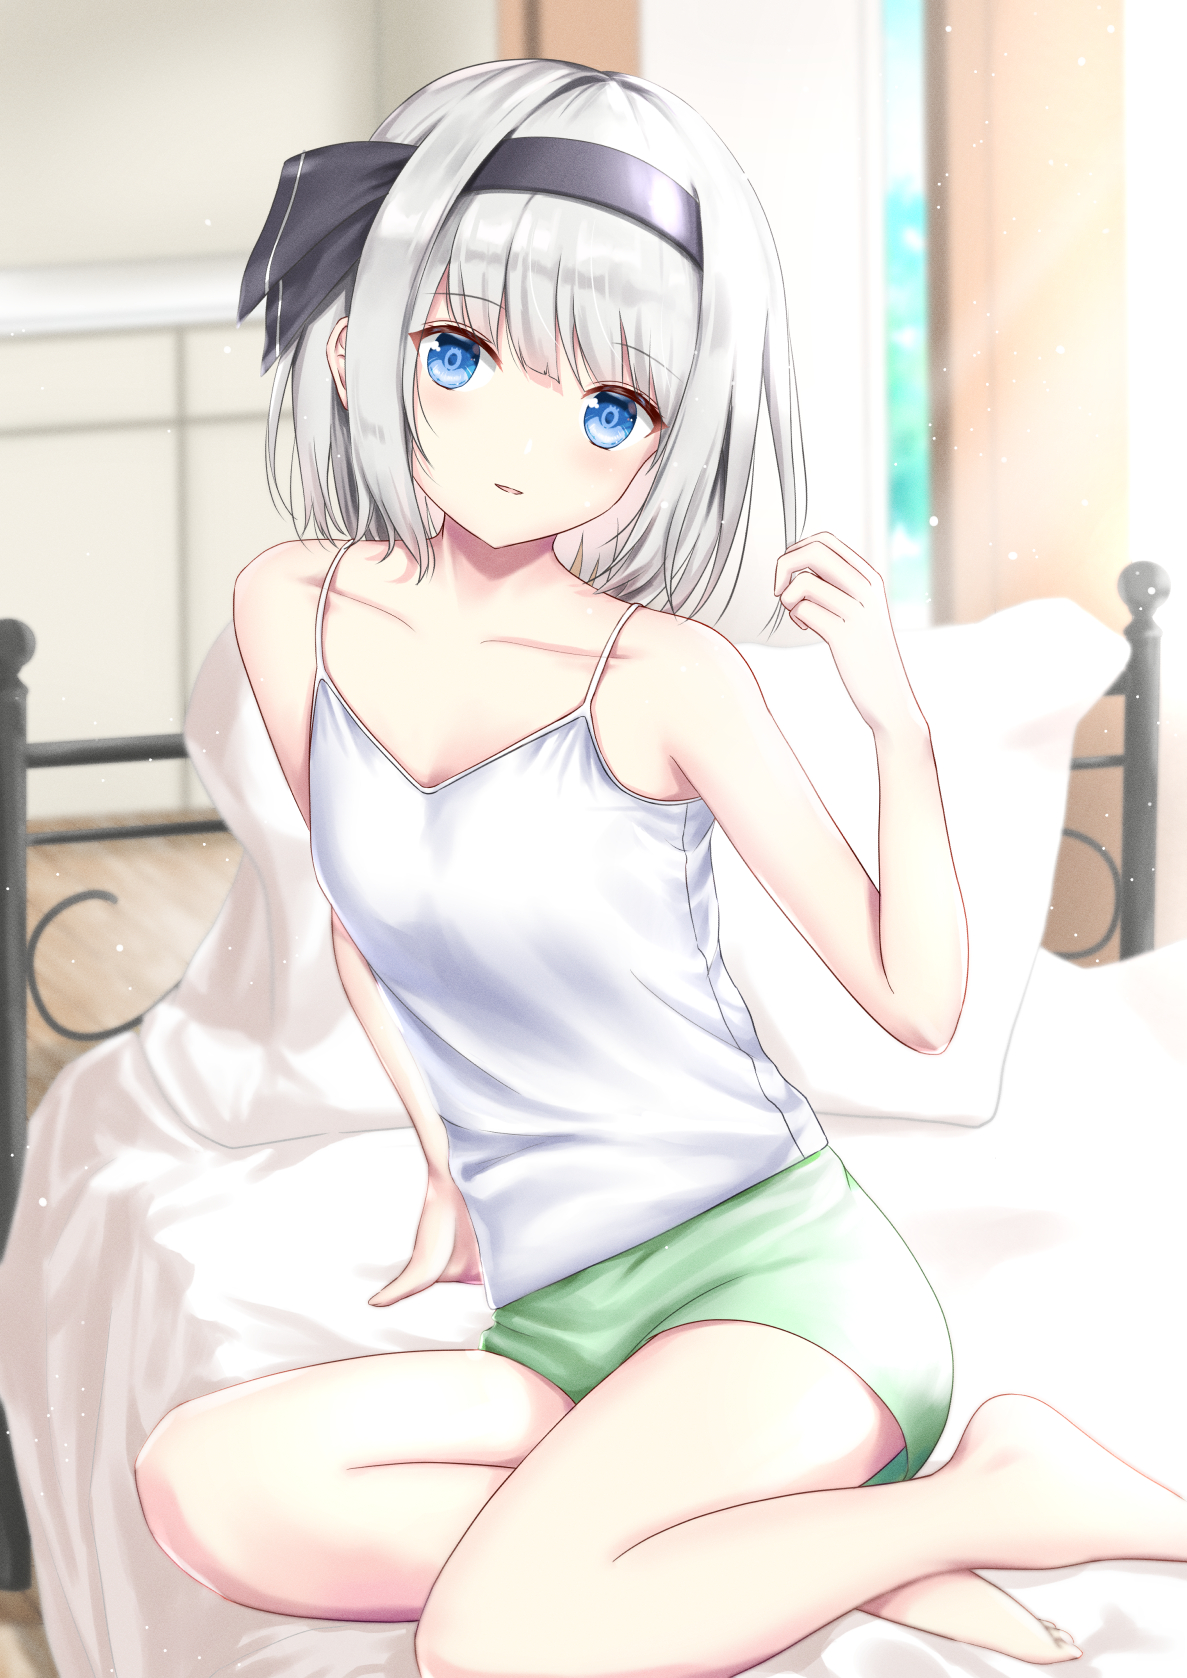 Anime 1187x1678 2D anime anime girls digital art digital belly belly button ecchi blue eyes silver hair hairband looking at viewer green short shorts spaghetti straps white shirt sitting on bed arms up legs crossed bed Pixiv